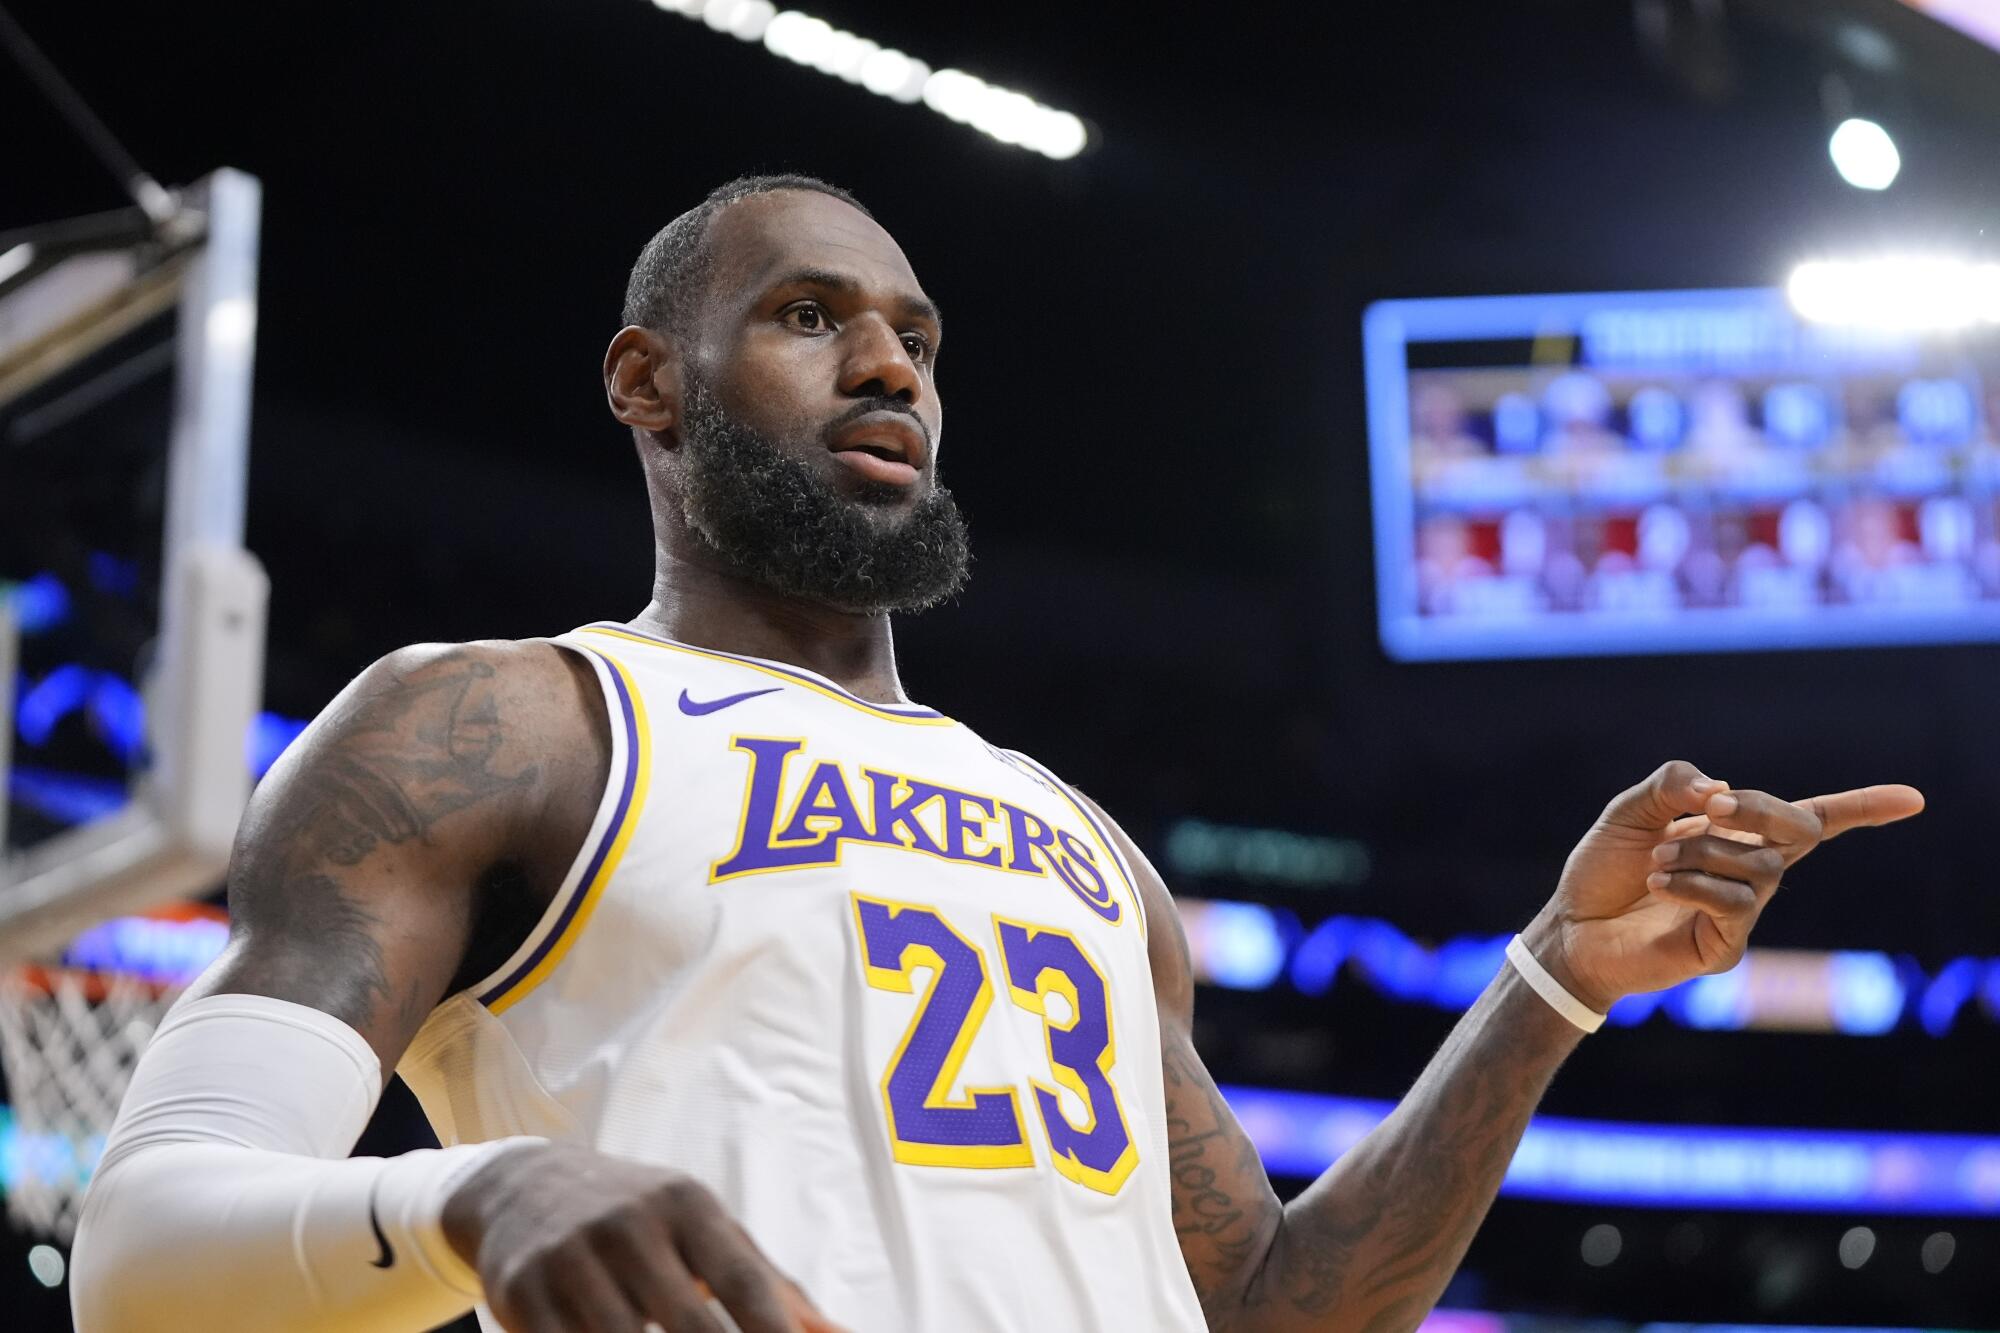 Lakers come alive late and overcome turnover woes to beat 76ers